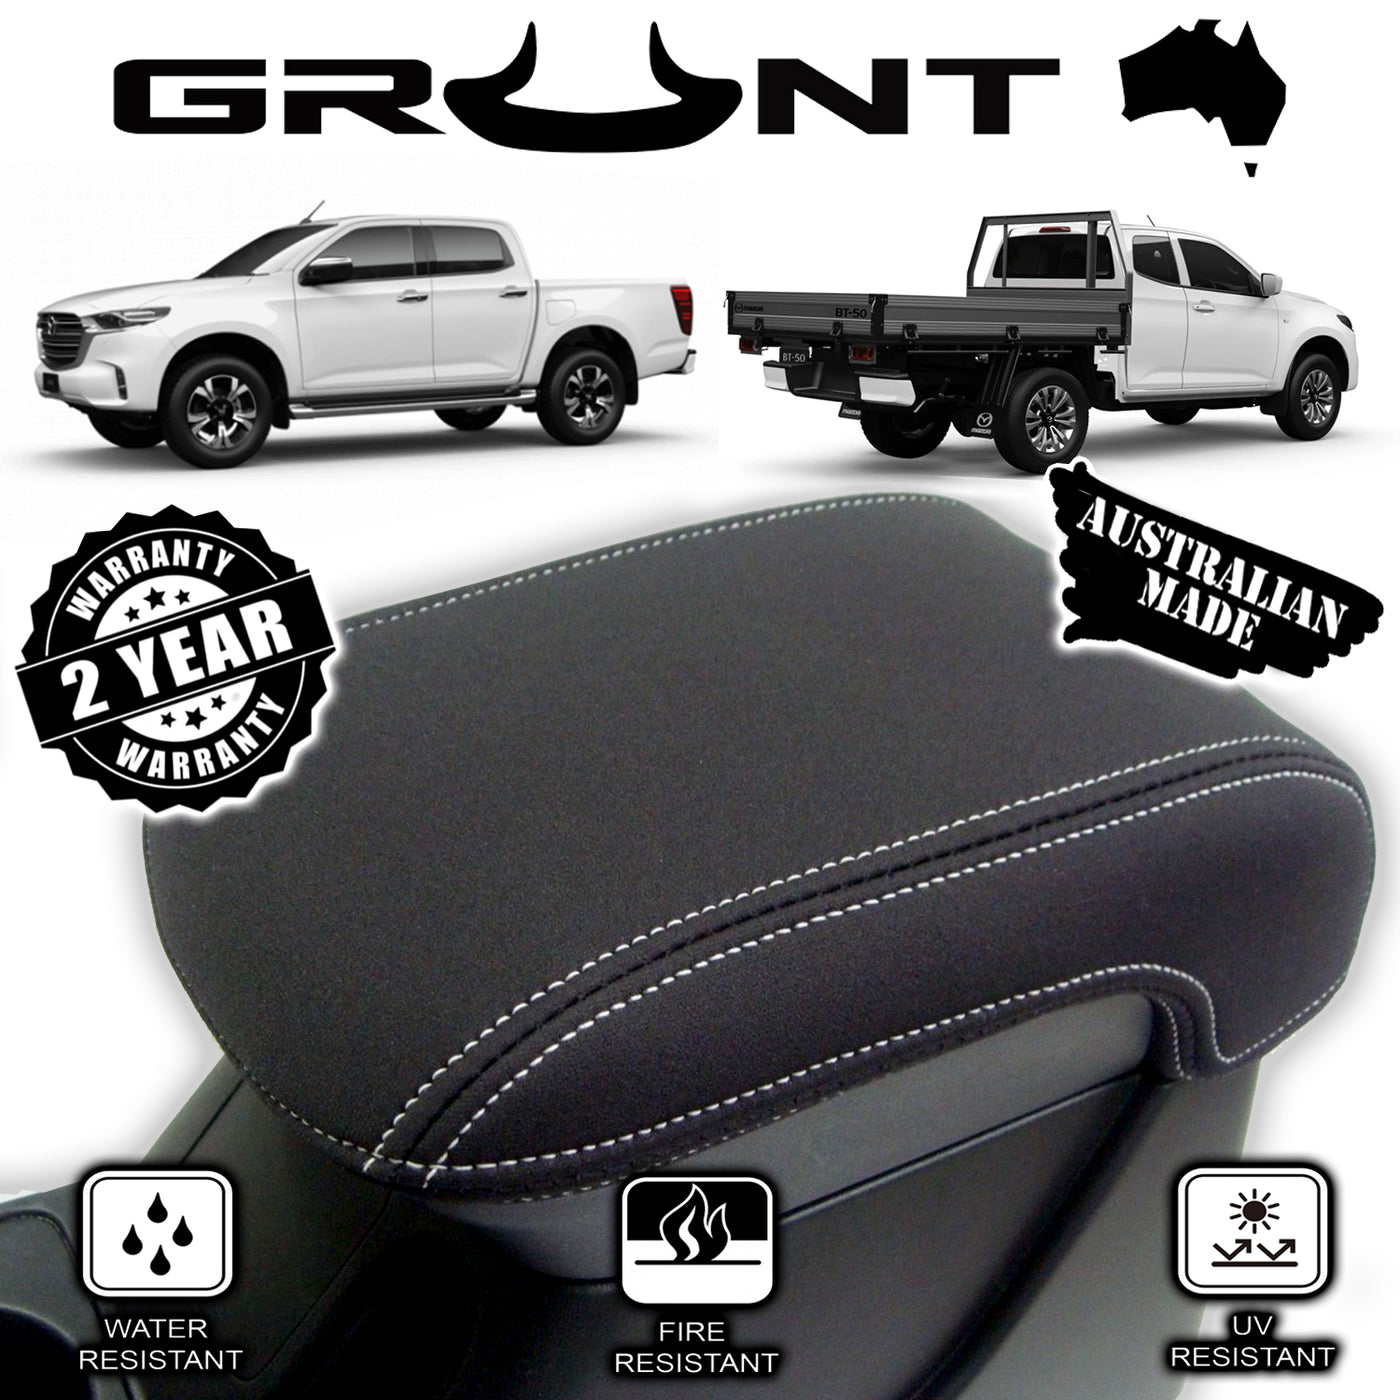 Grunt 4x4 neoprene center console lid cover wetsuit for Mazda BT-50 2020-2021